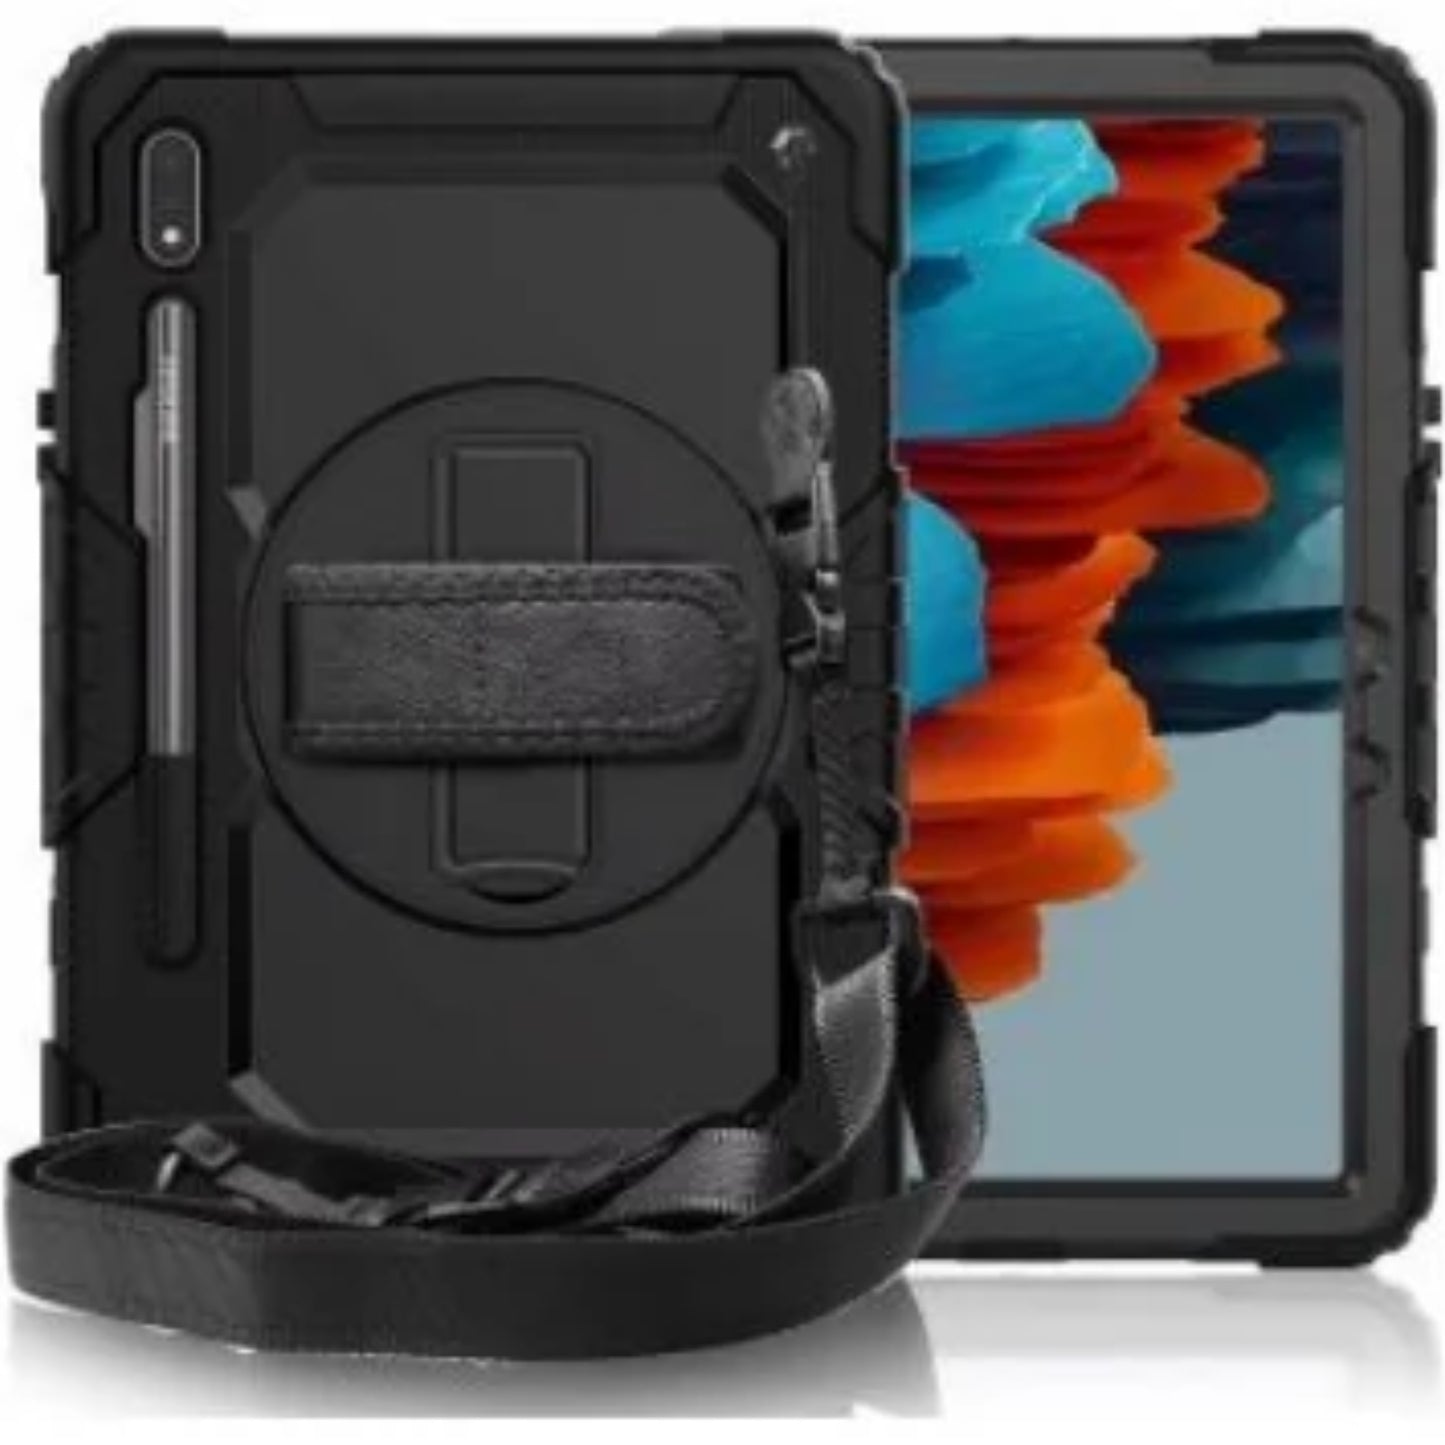 Pure Guardian 2 Case iPad New 2017/2018 9.7 - Black With Strap And In-build Screen Guard